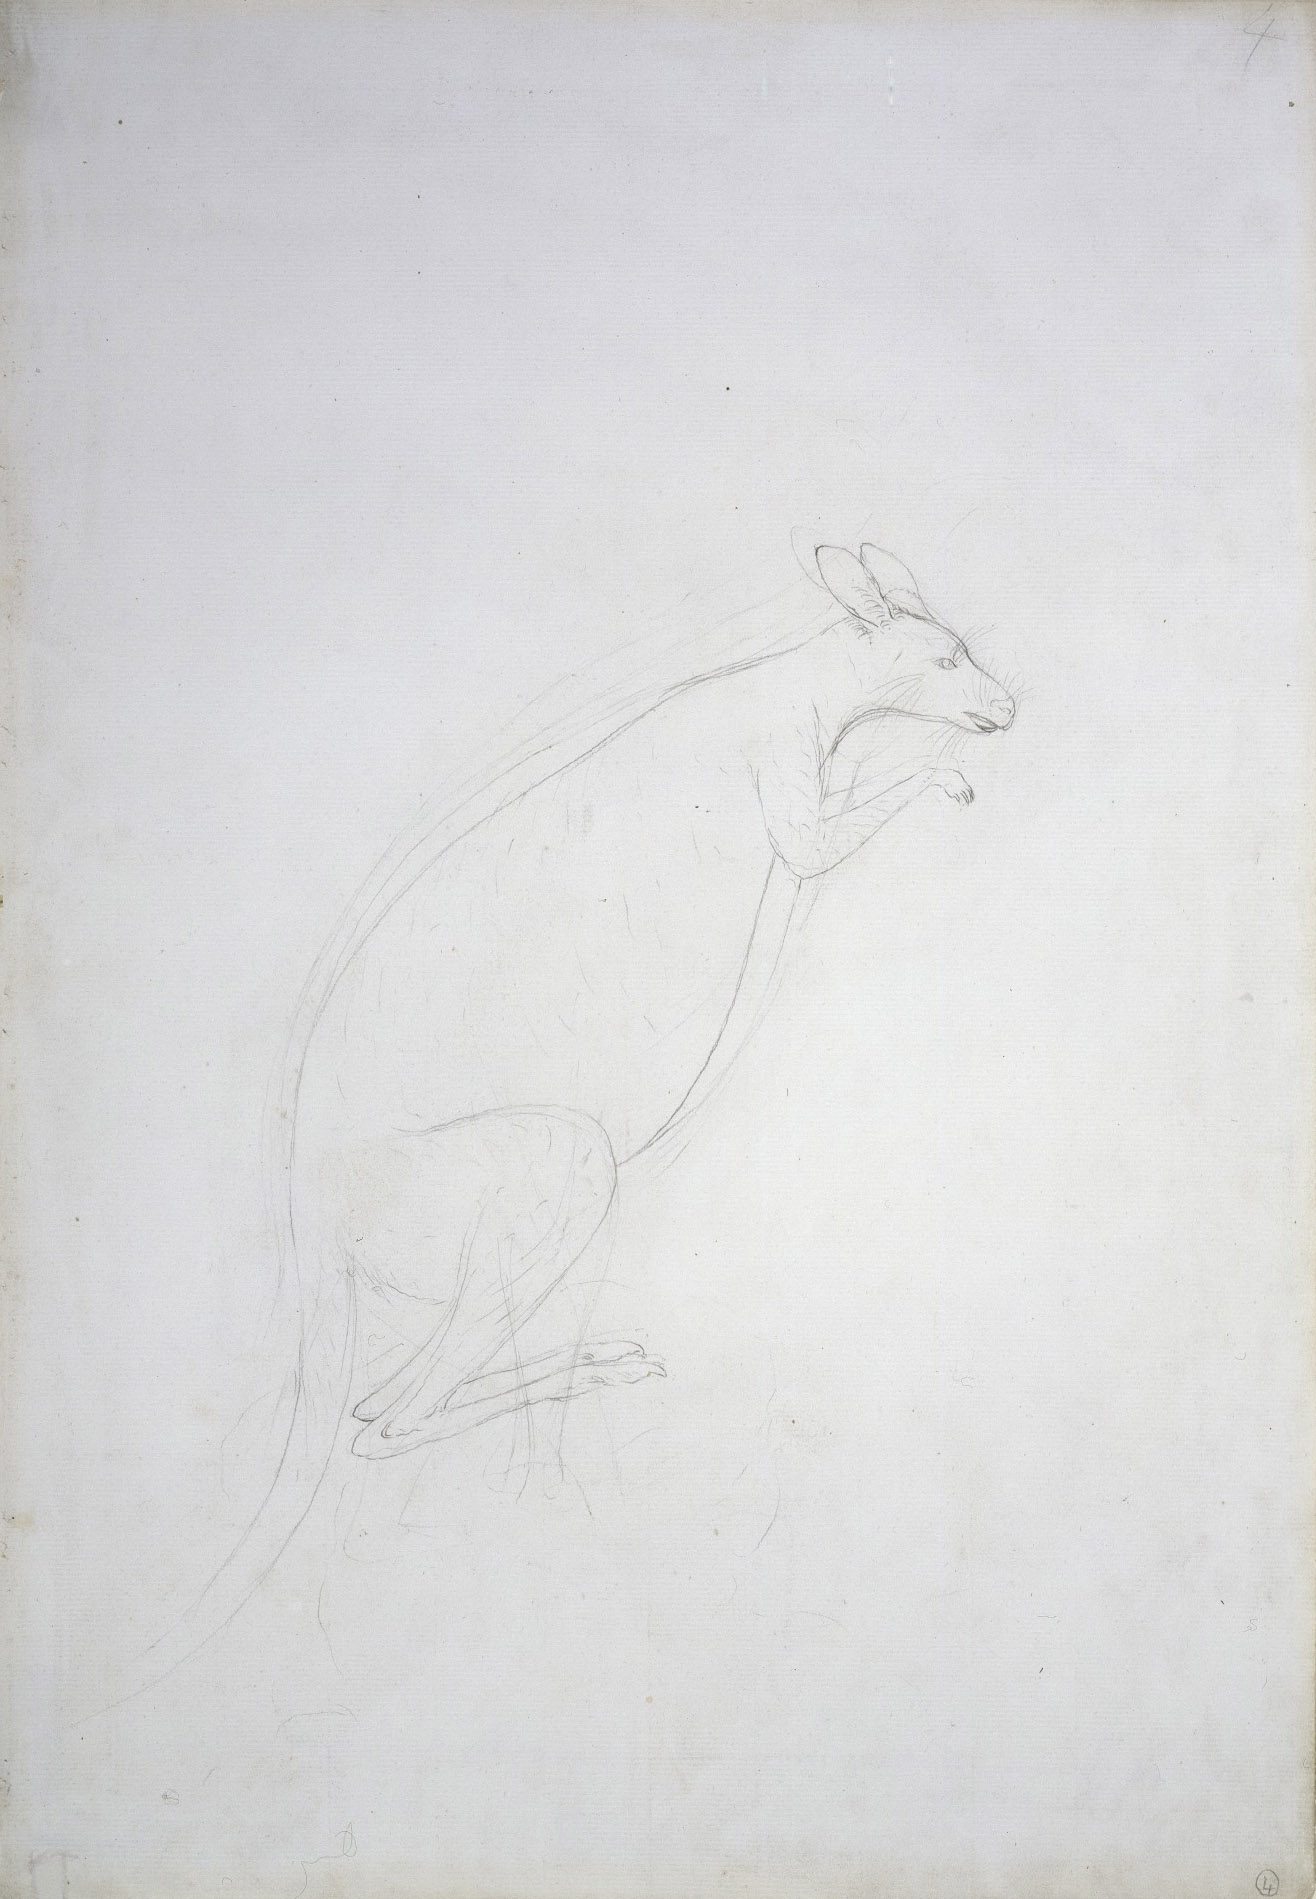 The first European drawing of a kangaroo, made by Sydney Parkinson at Endeavour River.